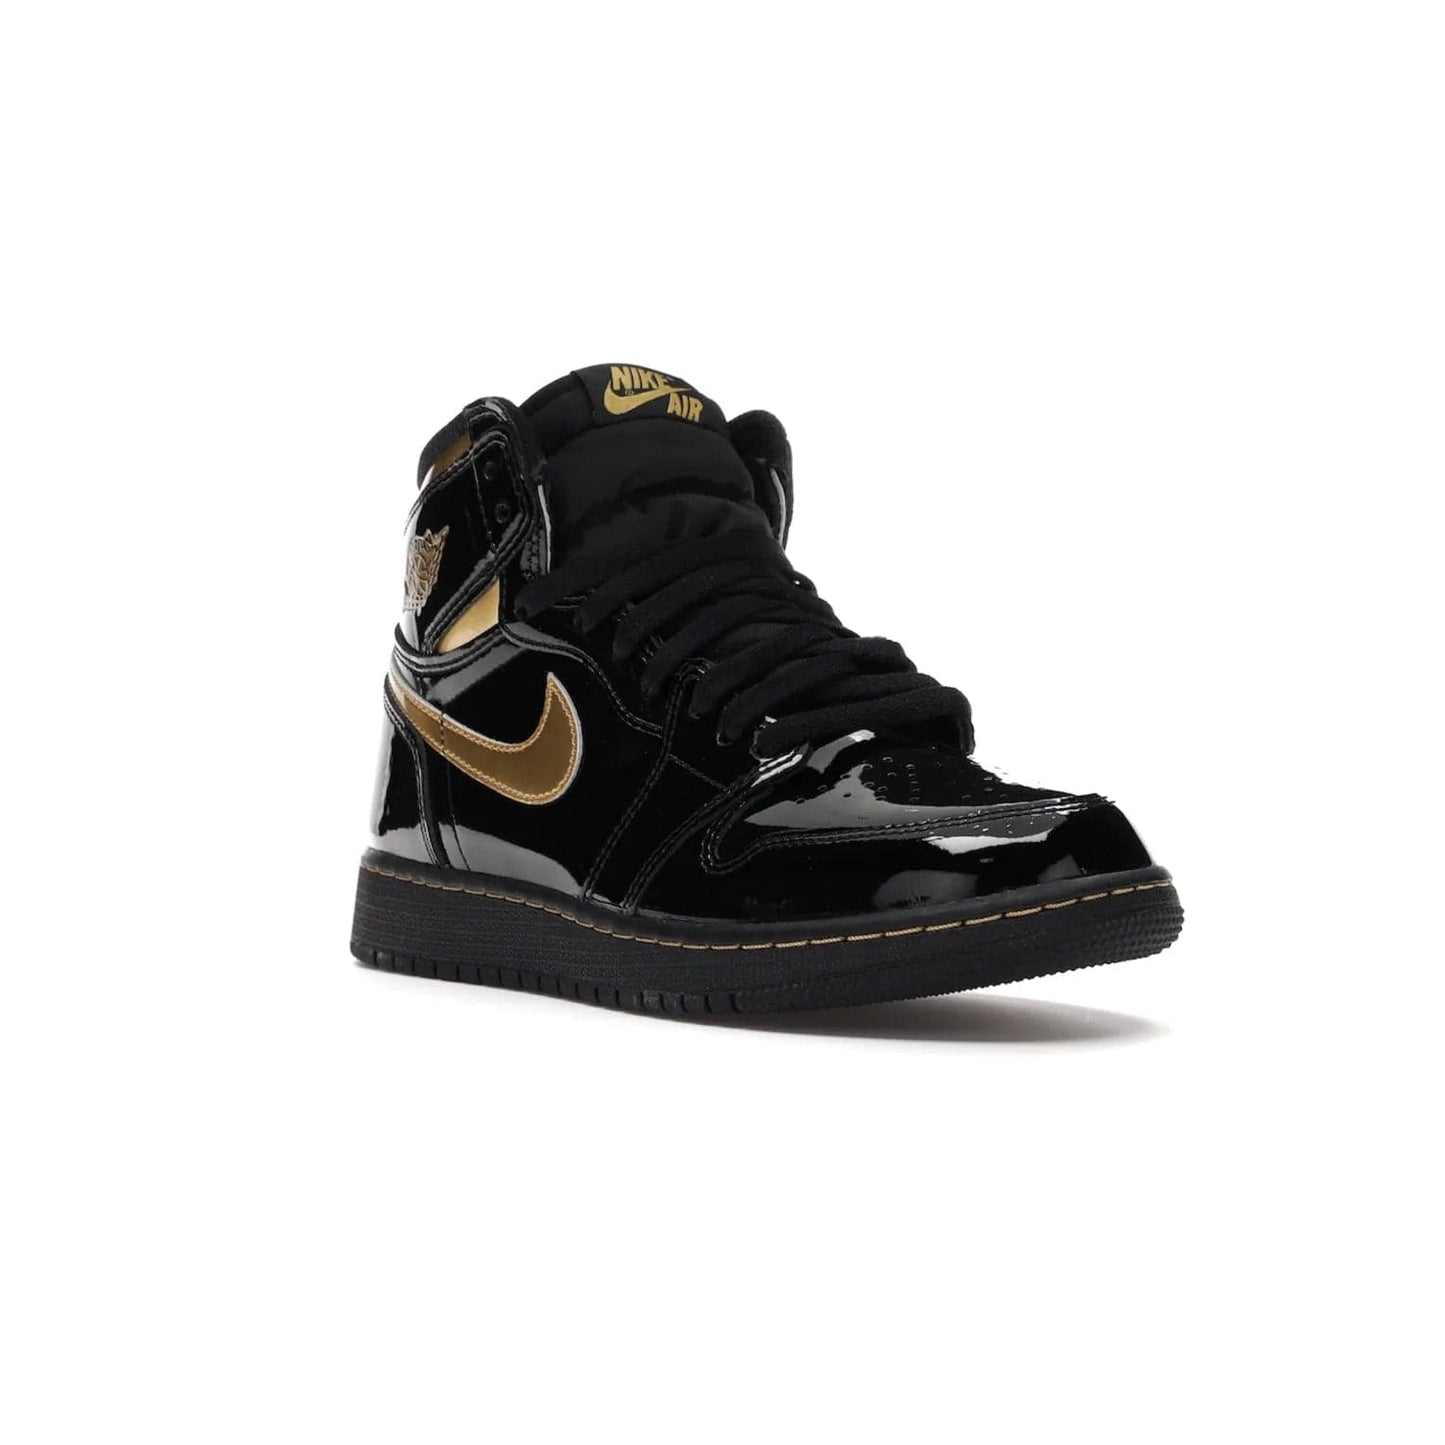 Jordan 1 Retro High Black Metallic Gold (2020) (GS) - Image 6 - Only at www.BallersClubKickz.com - Shop the Kids Air Jordan 1 Retro High in Black Metallic Gold for a stylish and comfortable sneaker kids can love. Featuring black and metallic gold patent leather uppers, metallic gold accents, and an Air sole unit for extra cushioning.